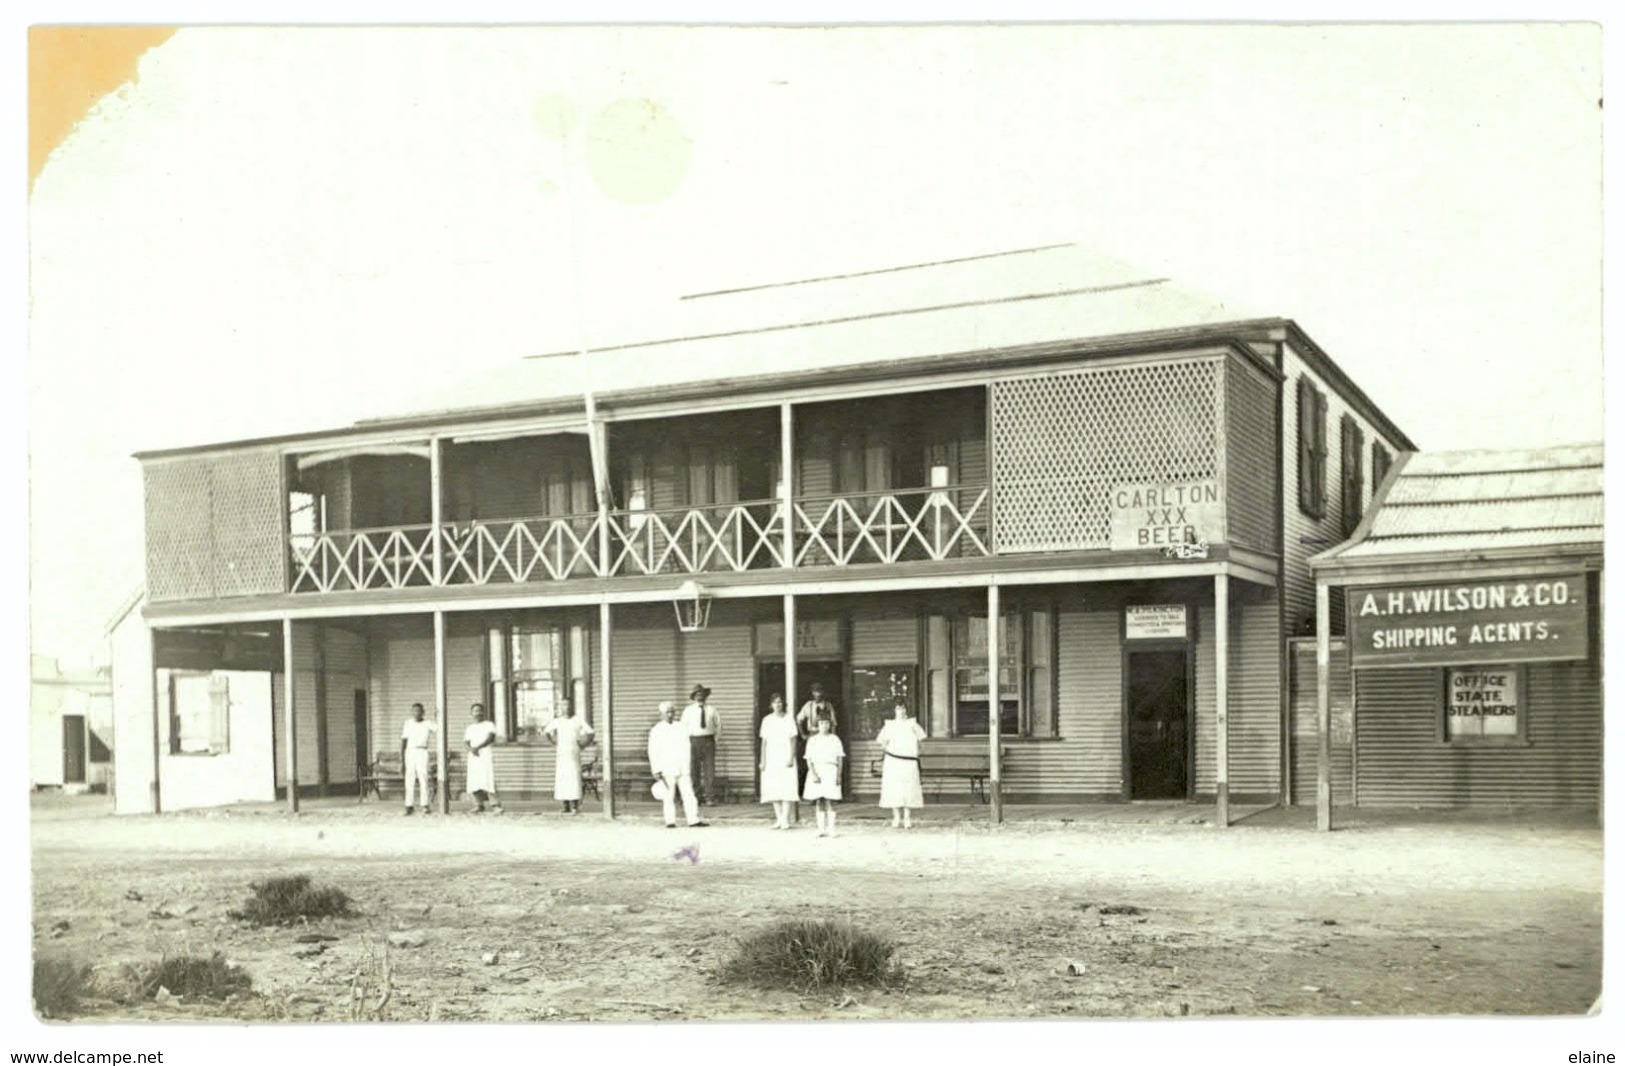 Australian Outback Hotel Licensee Name Pilkington - Real Photo - Outback